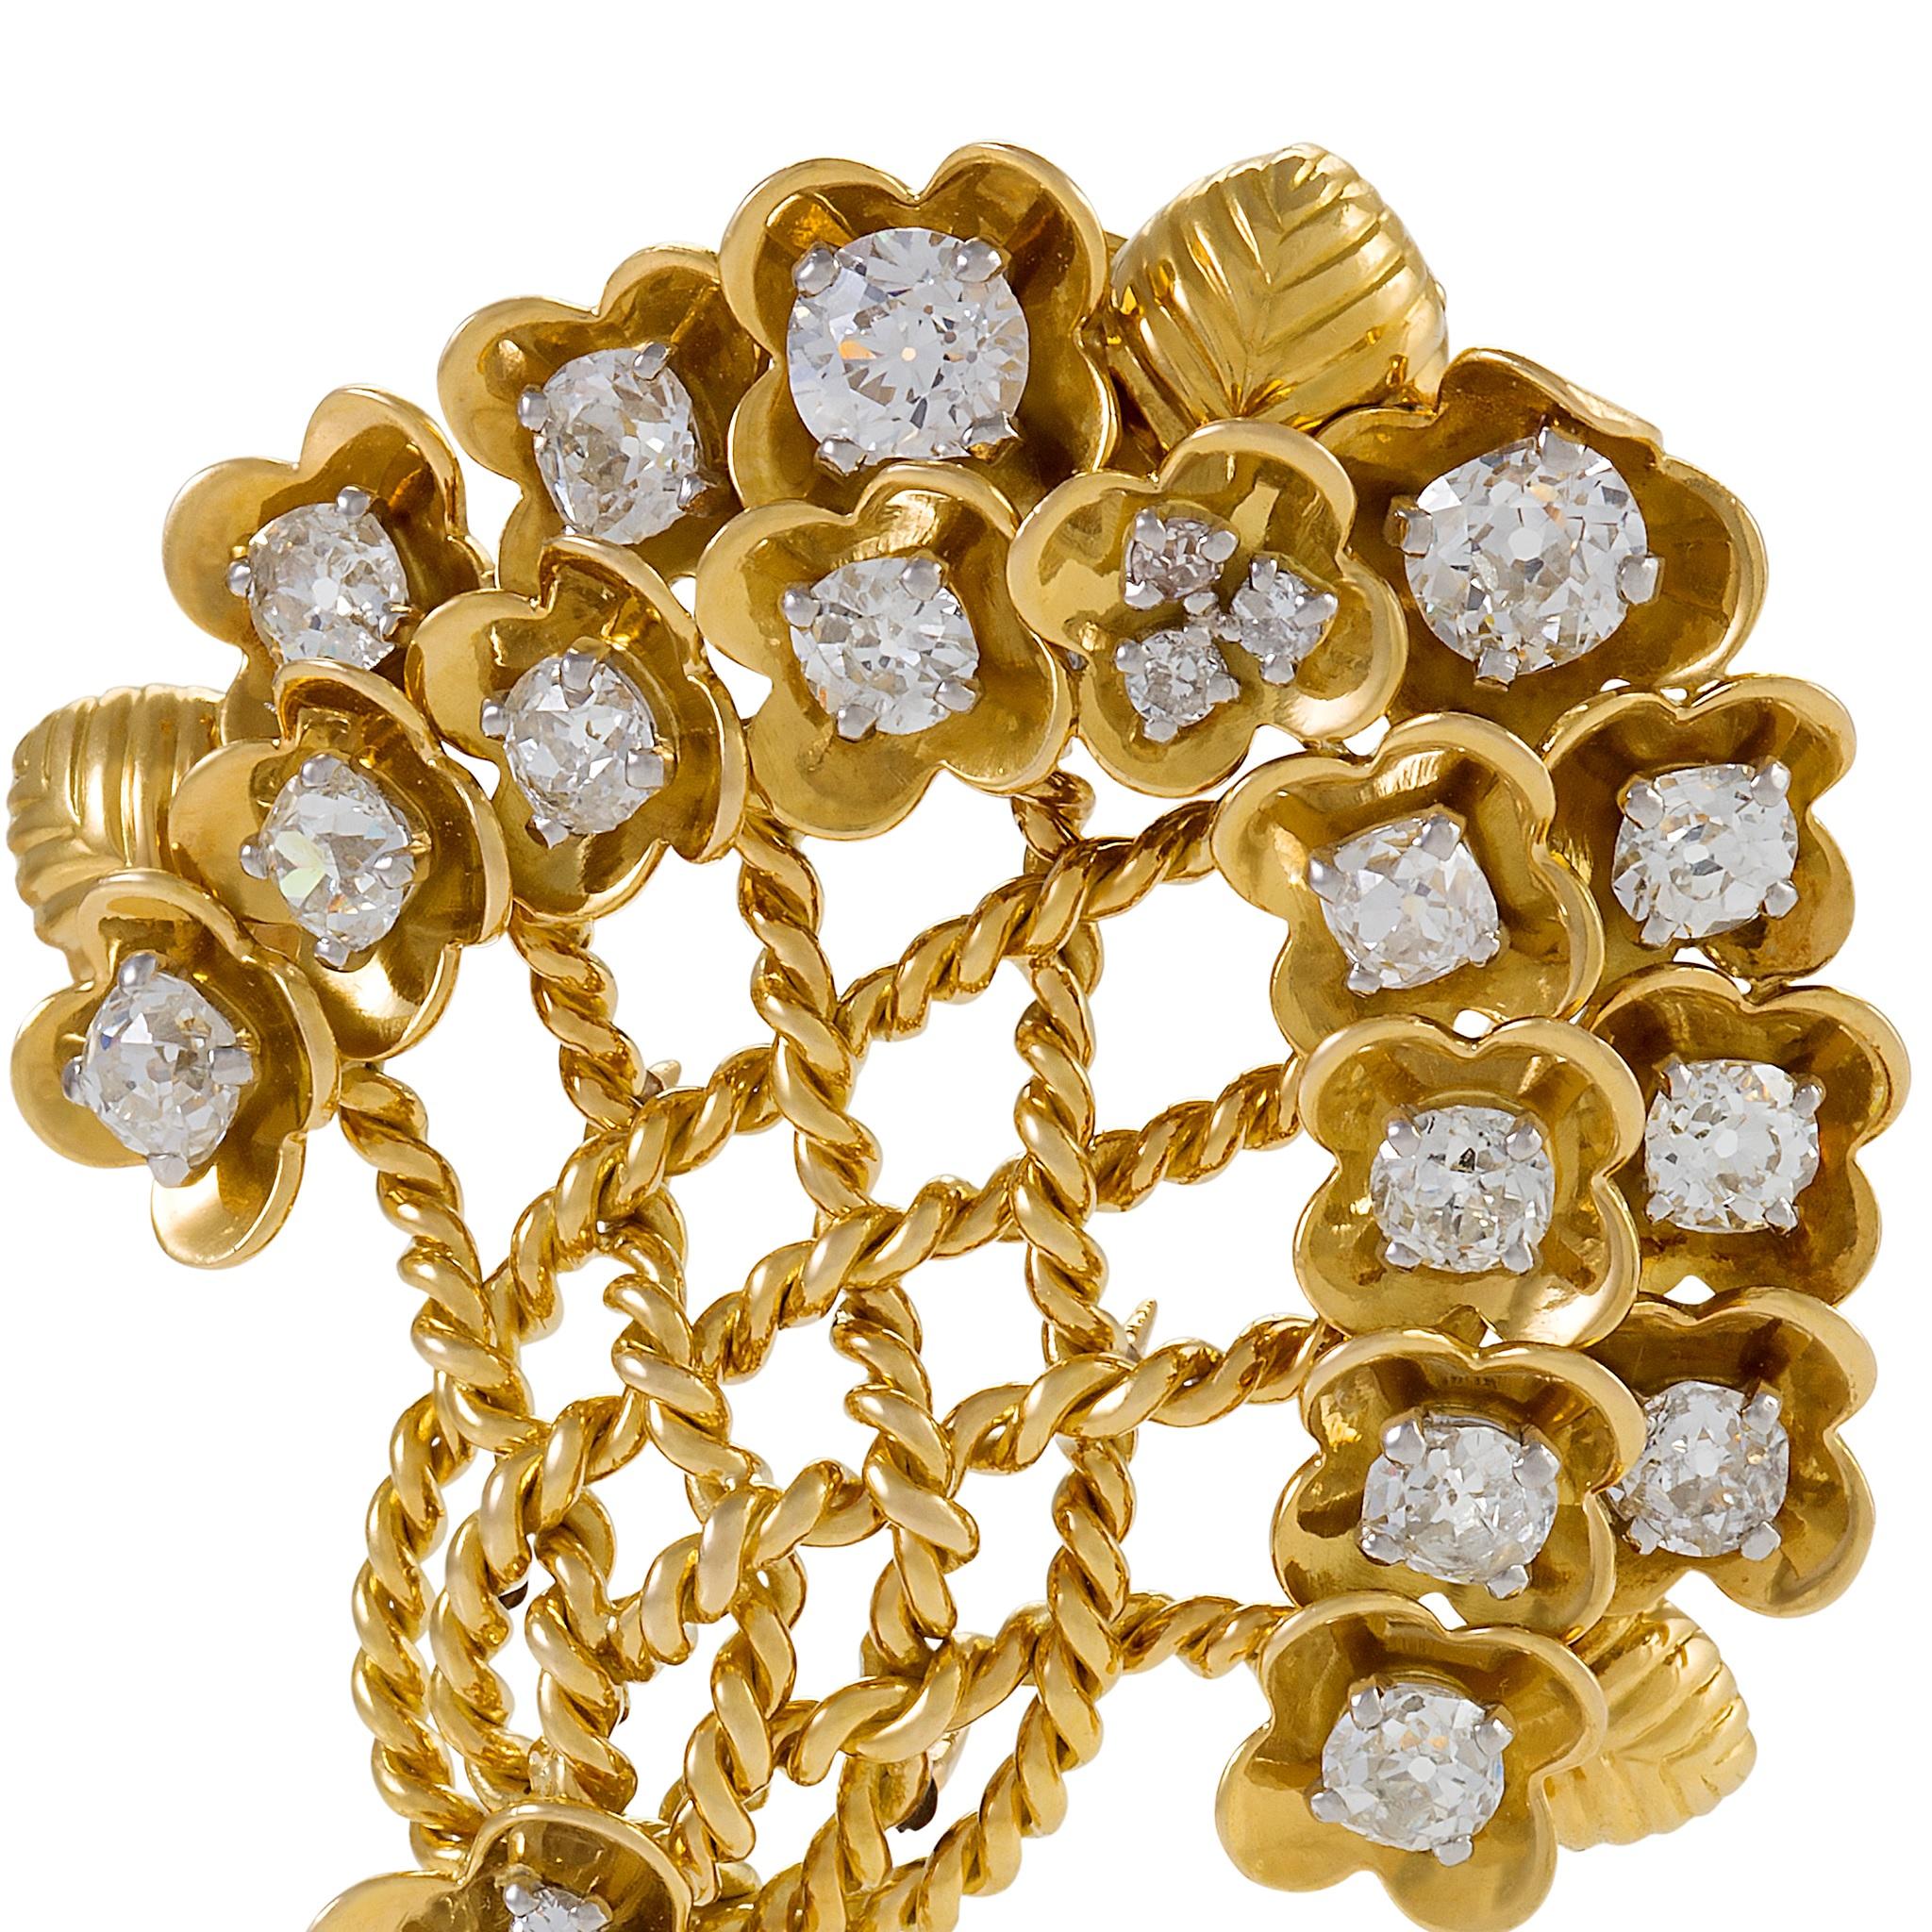 A French Retro 18 karat gold, platinum and diamond brooch by Cartier. The brooch is designed as a stylized flower bouquet, decorated with 21 Old European-cut and cushion-shaped diamonds that have the approximate total weight of 5.00 carats. The